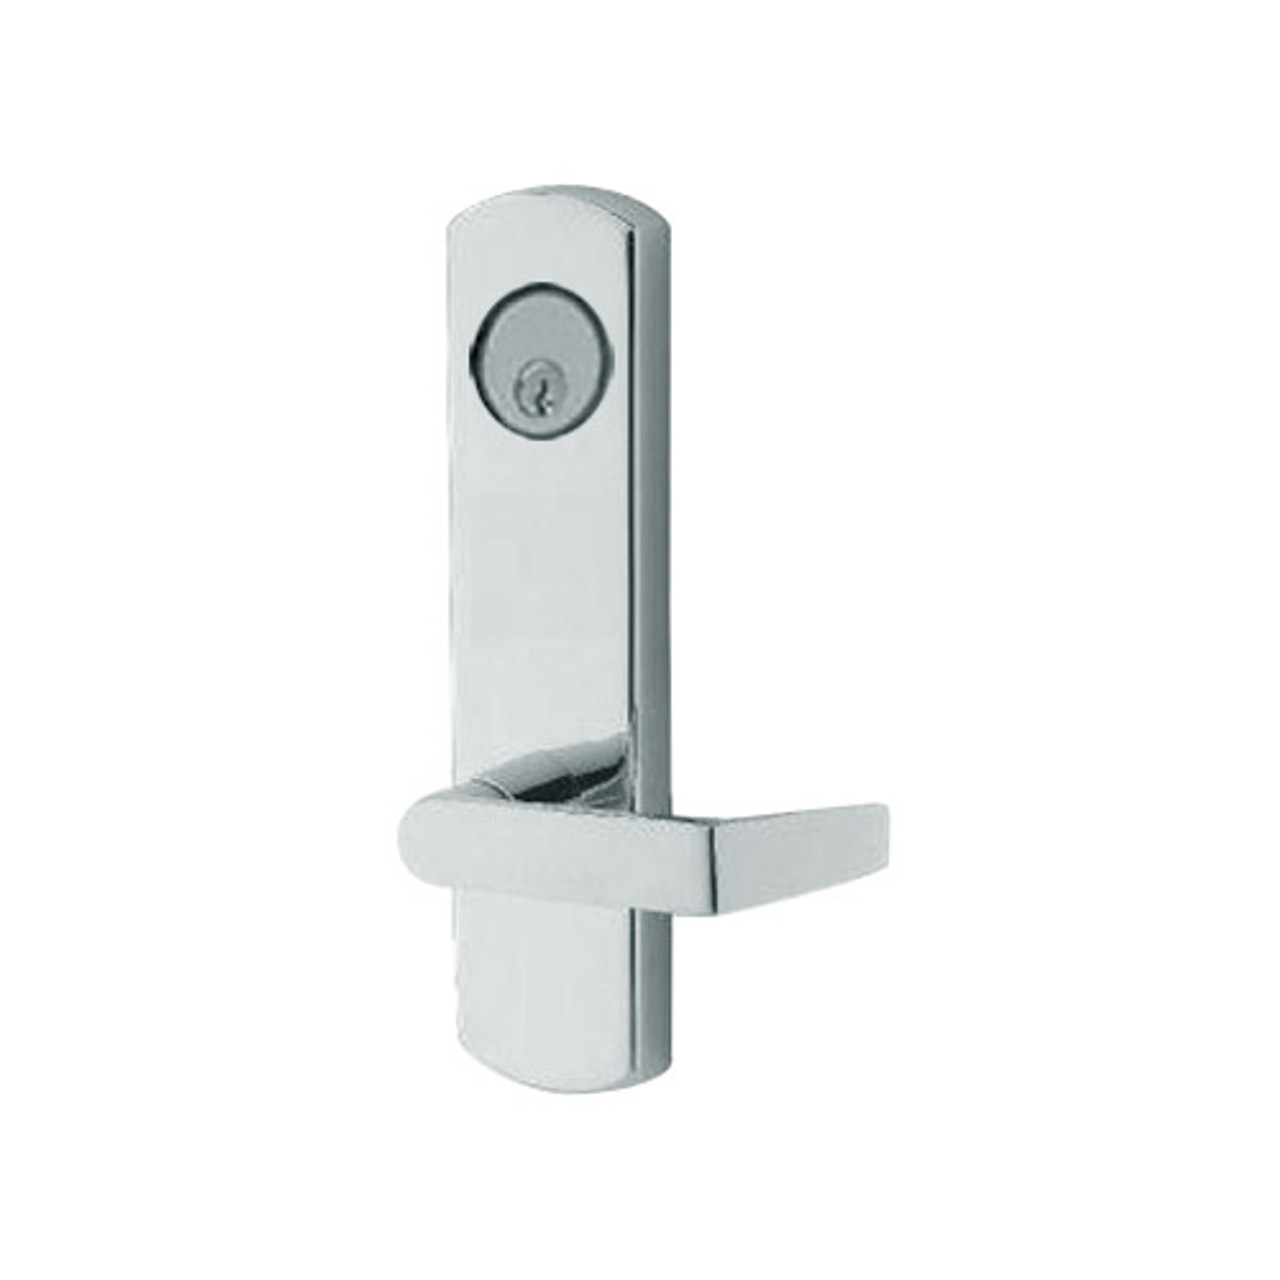 3080E-03-0-33-35 US32 Adams Rite Electrified Entry Trim with Square Lever in Bright Stainless Finish